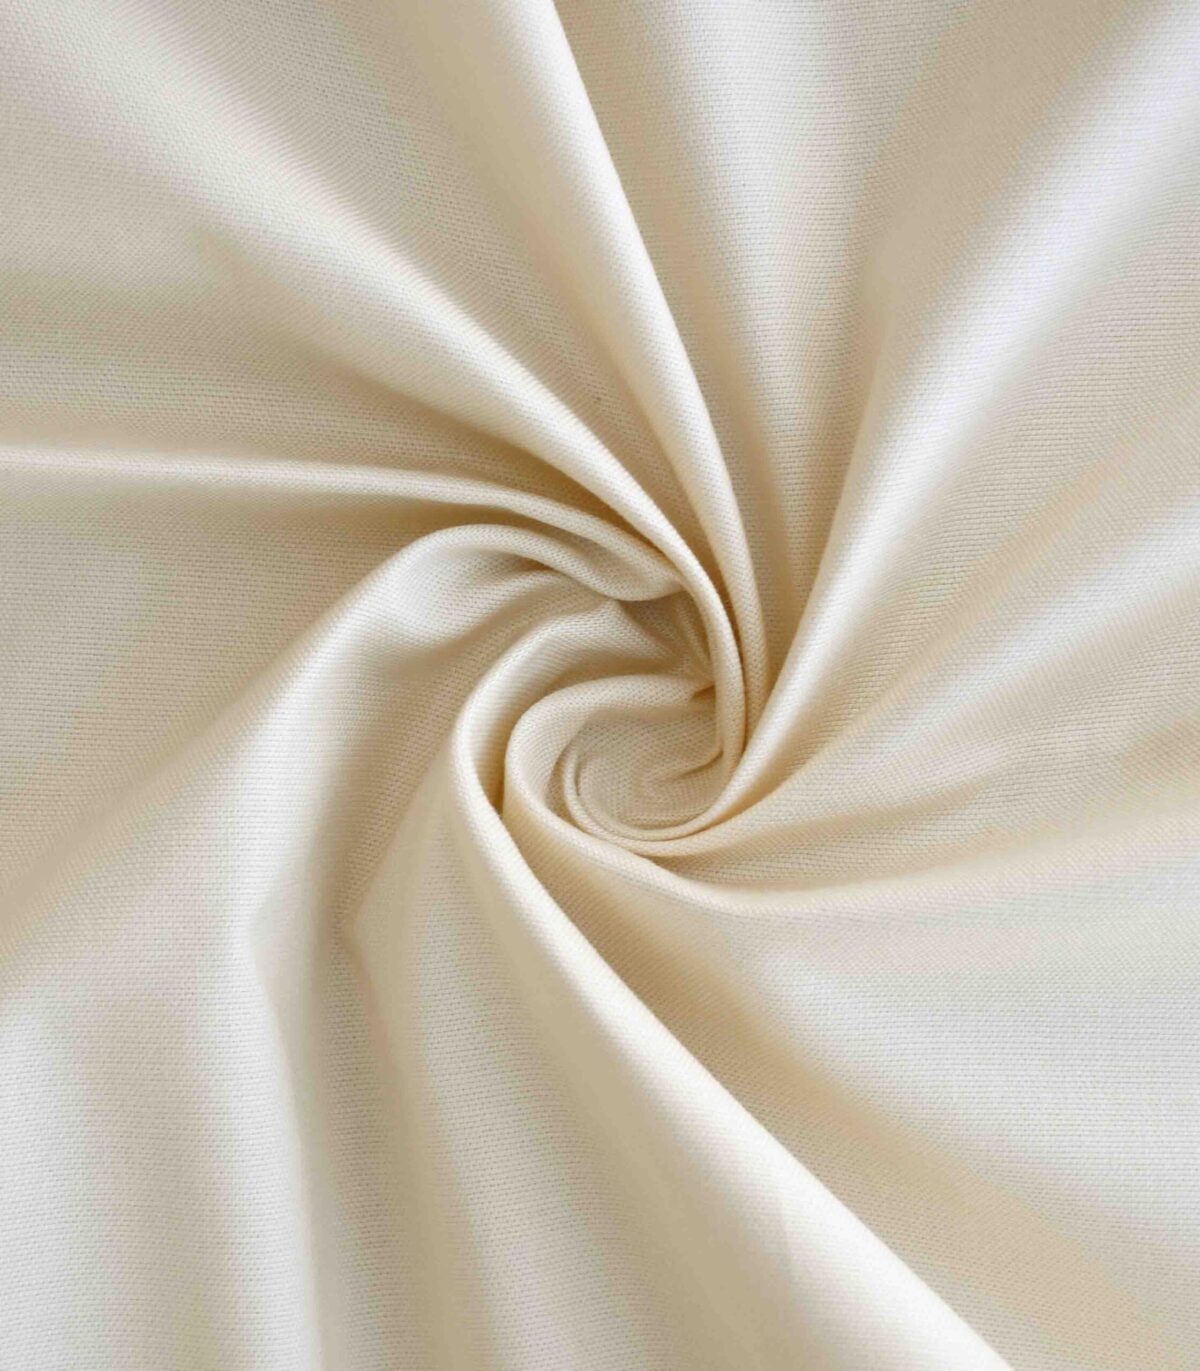 Beige Color Solid Cotton Fabric